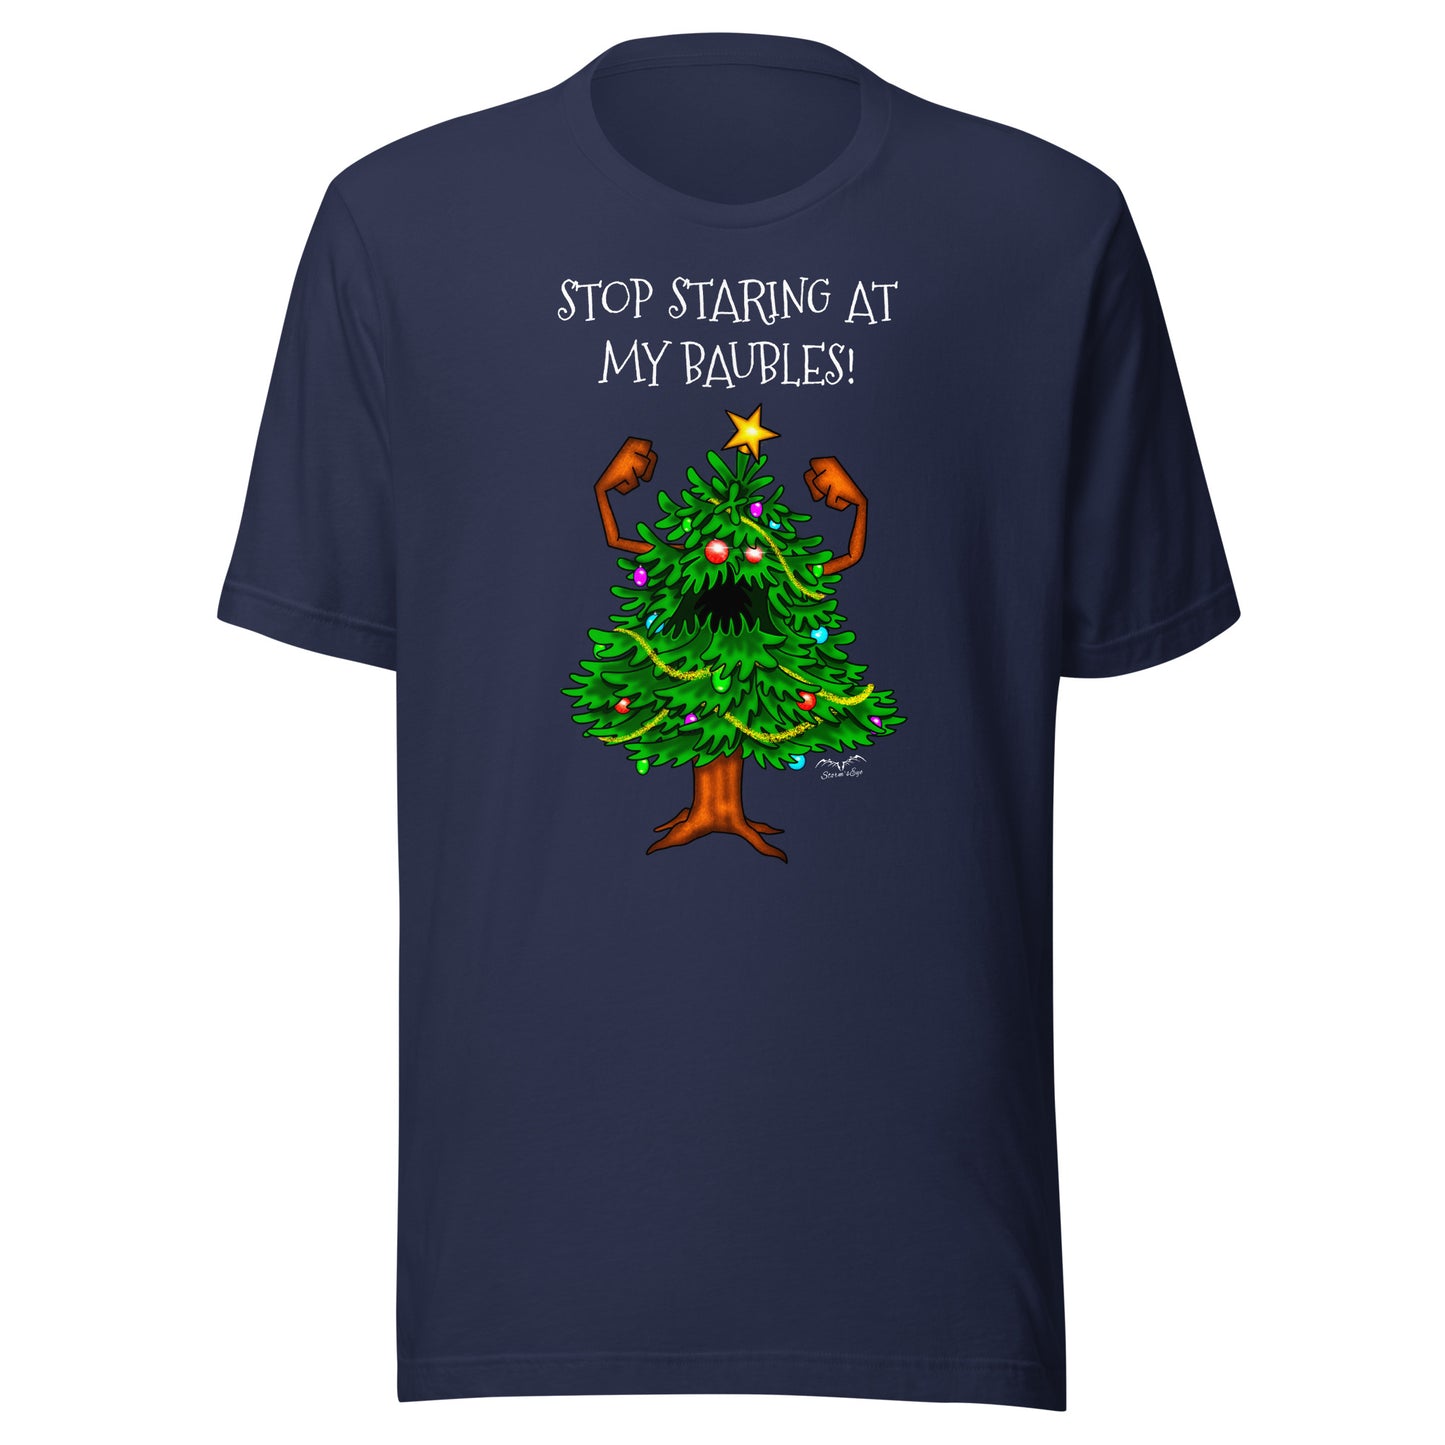 stormseye design angry christmas tree baubles T shirt, flat view navy blue